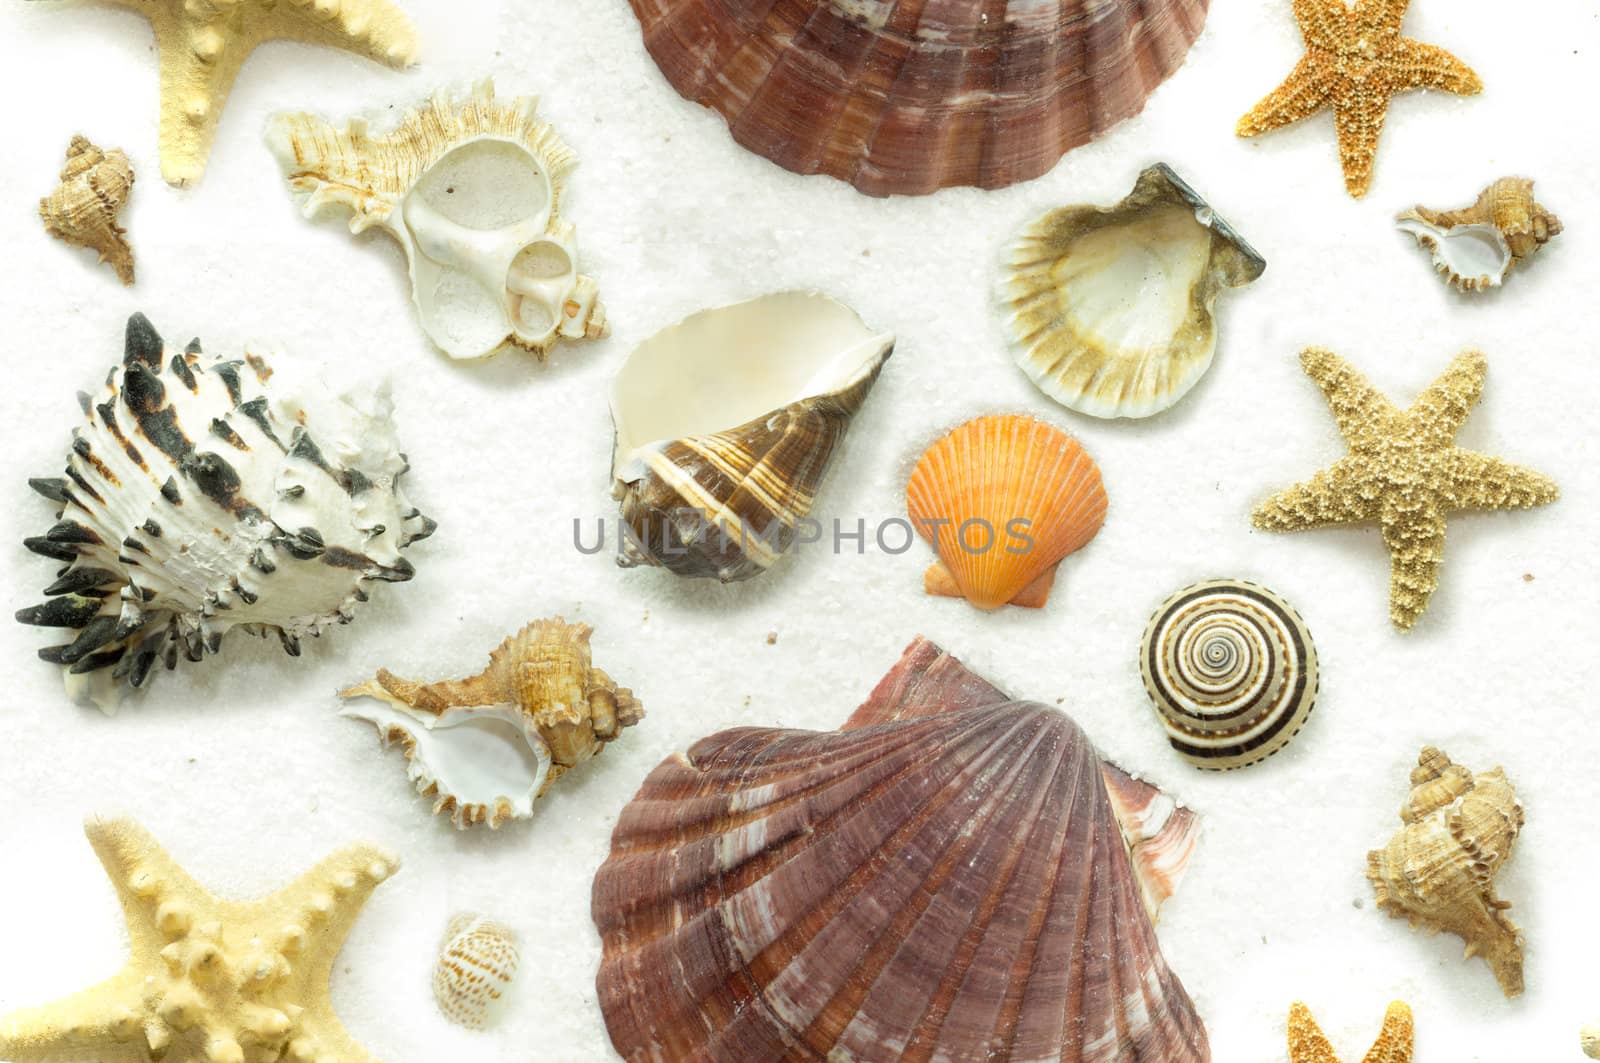 Seashells, sea snails, and starfish on a background of white sand